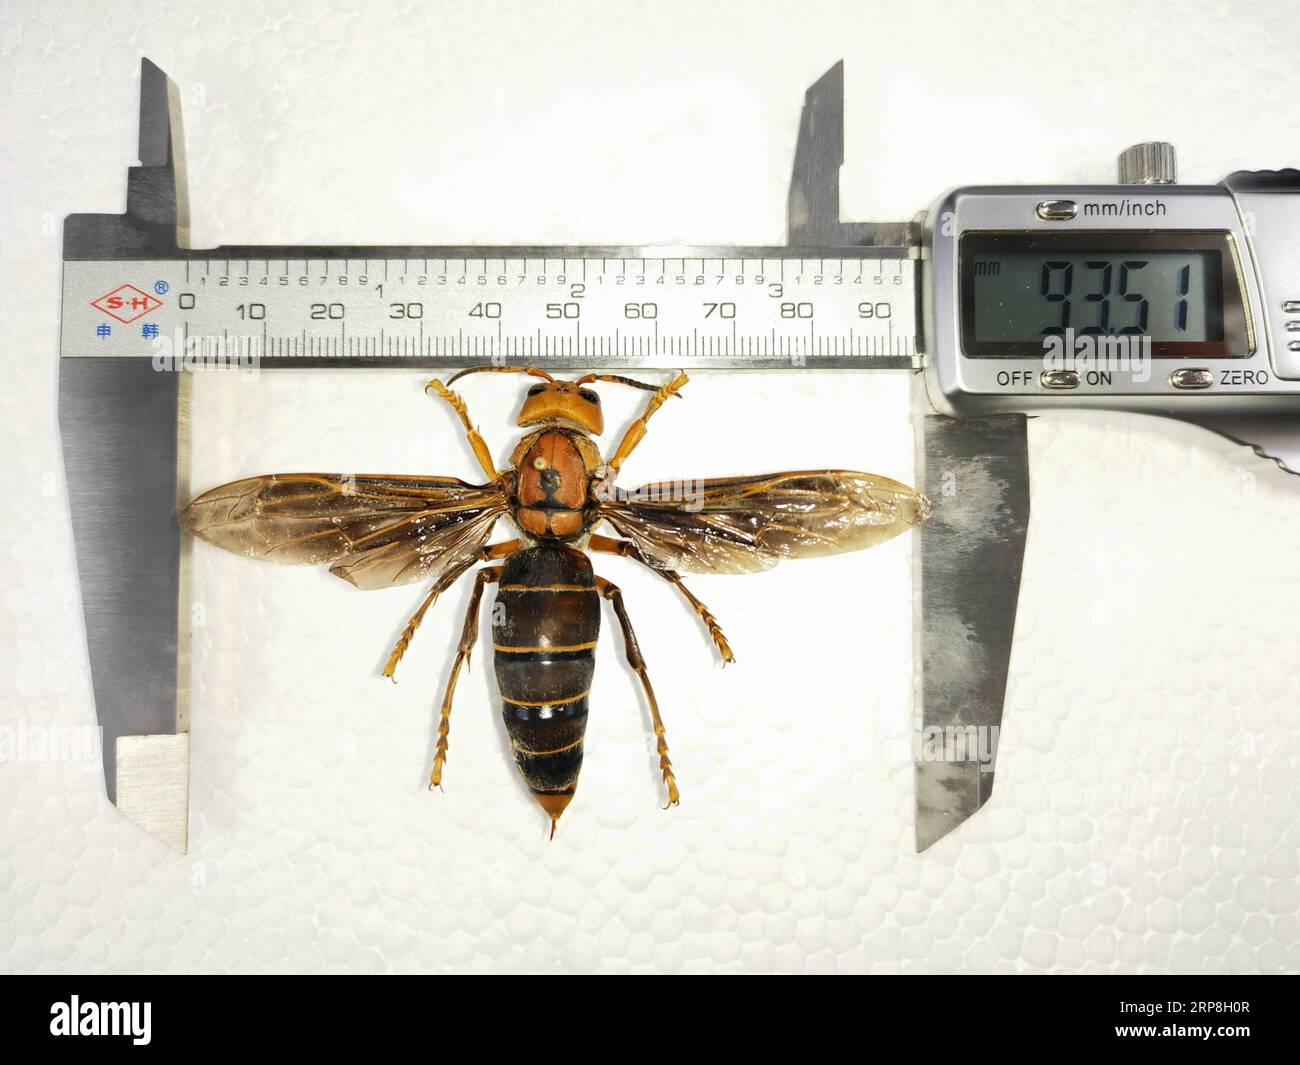 (190306) -- BEIJING, March 6, 2019 (Xinhua) -- A specimen of a Vespa mandarinia with a wingspan of 9.35 centimeters and a body length of over 6 centimeters is seen at Huaxi Insect Museum in Chengdu, southwest China s Sichuan Province. (Xinhua/Huaxi Insect Museum) XINHUA PHOTOS OF THE DAY PUBLICATIONxNOTxINxCHN Stock Photo